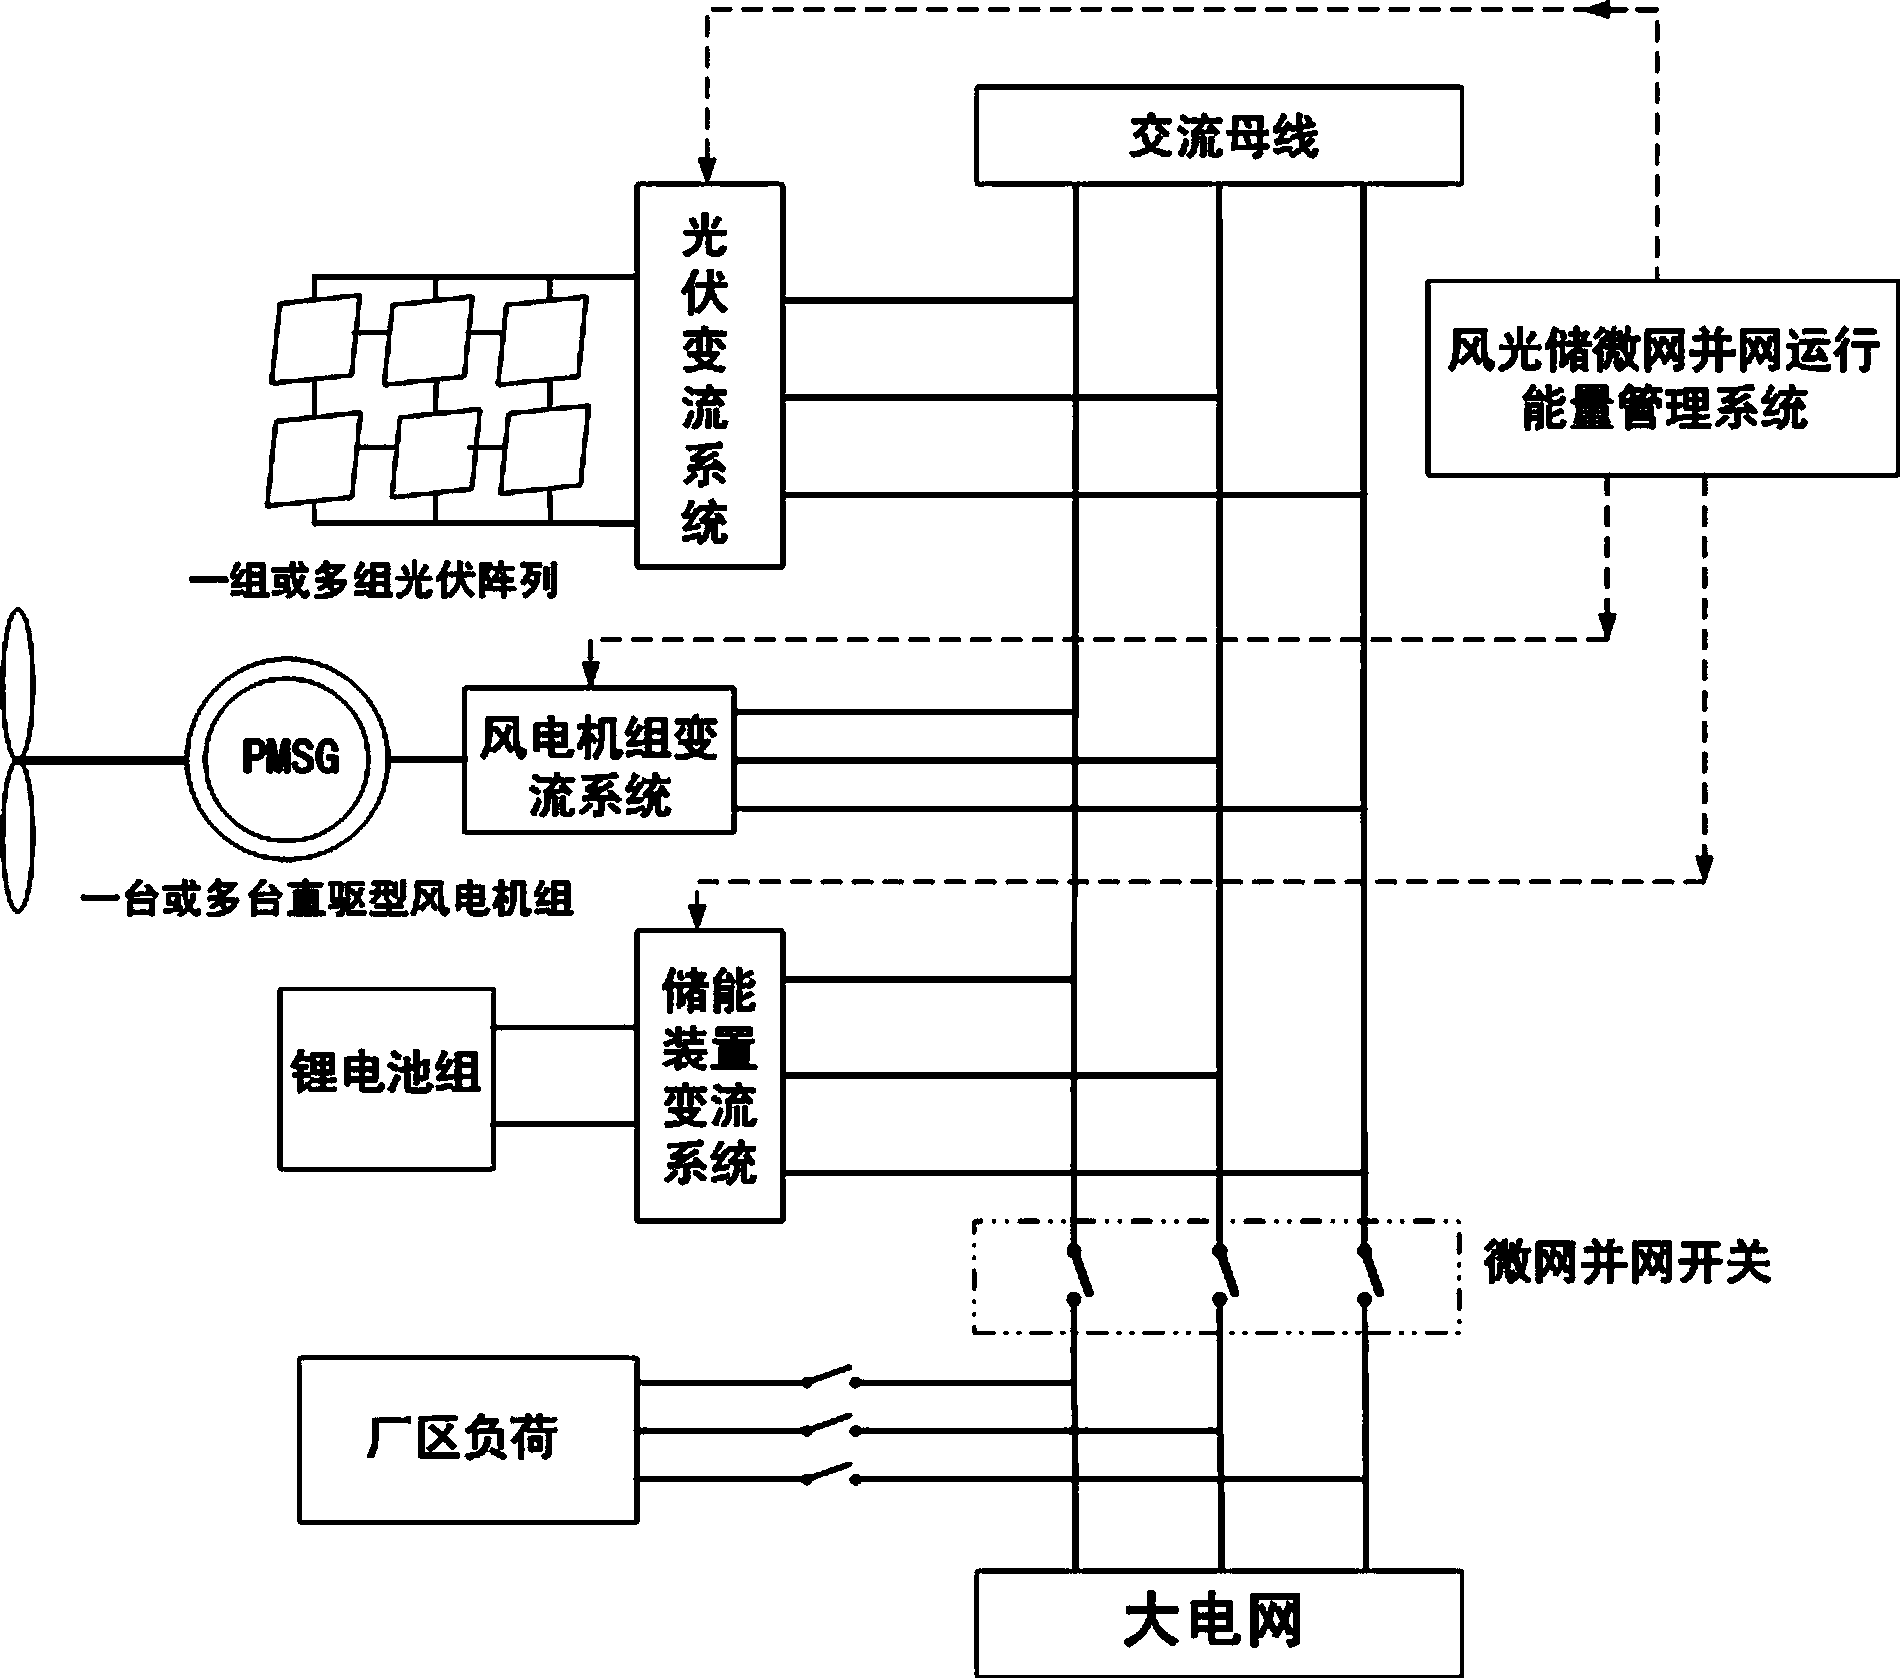 Energy management system for grid-connected operation of wind and photovoltaic power storage micro-grid system